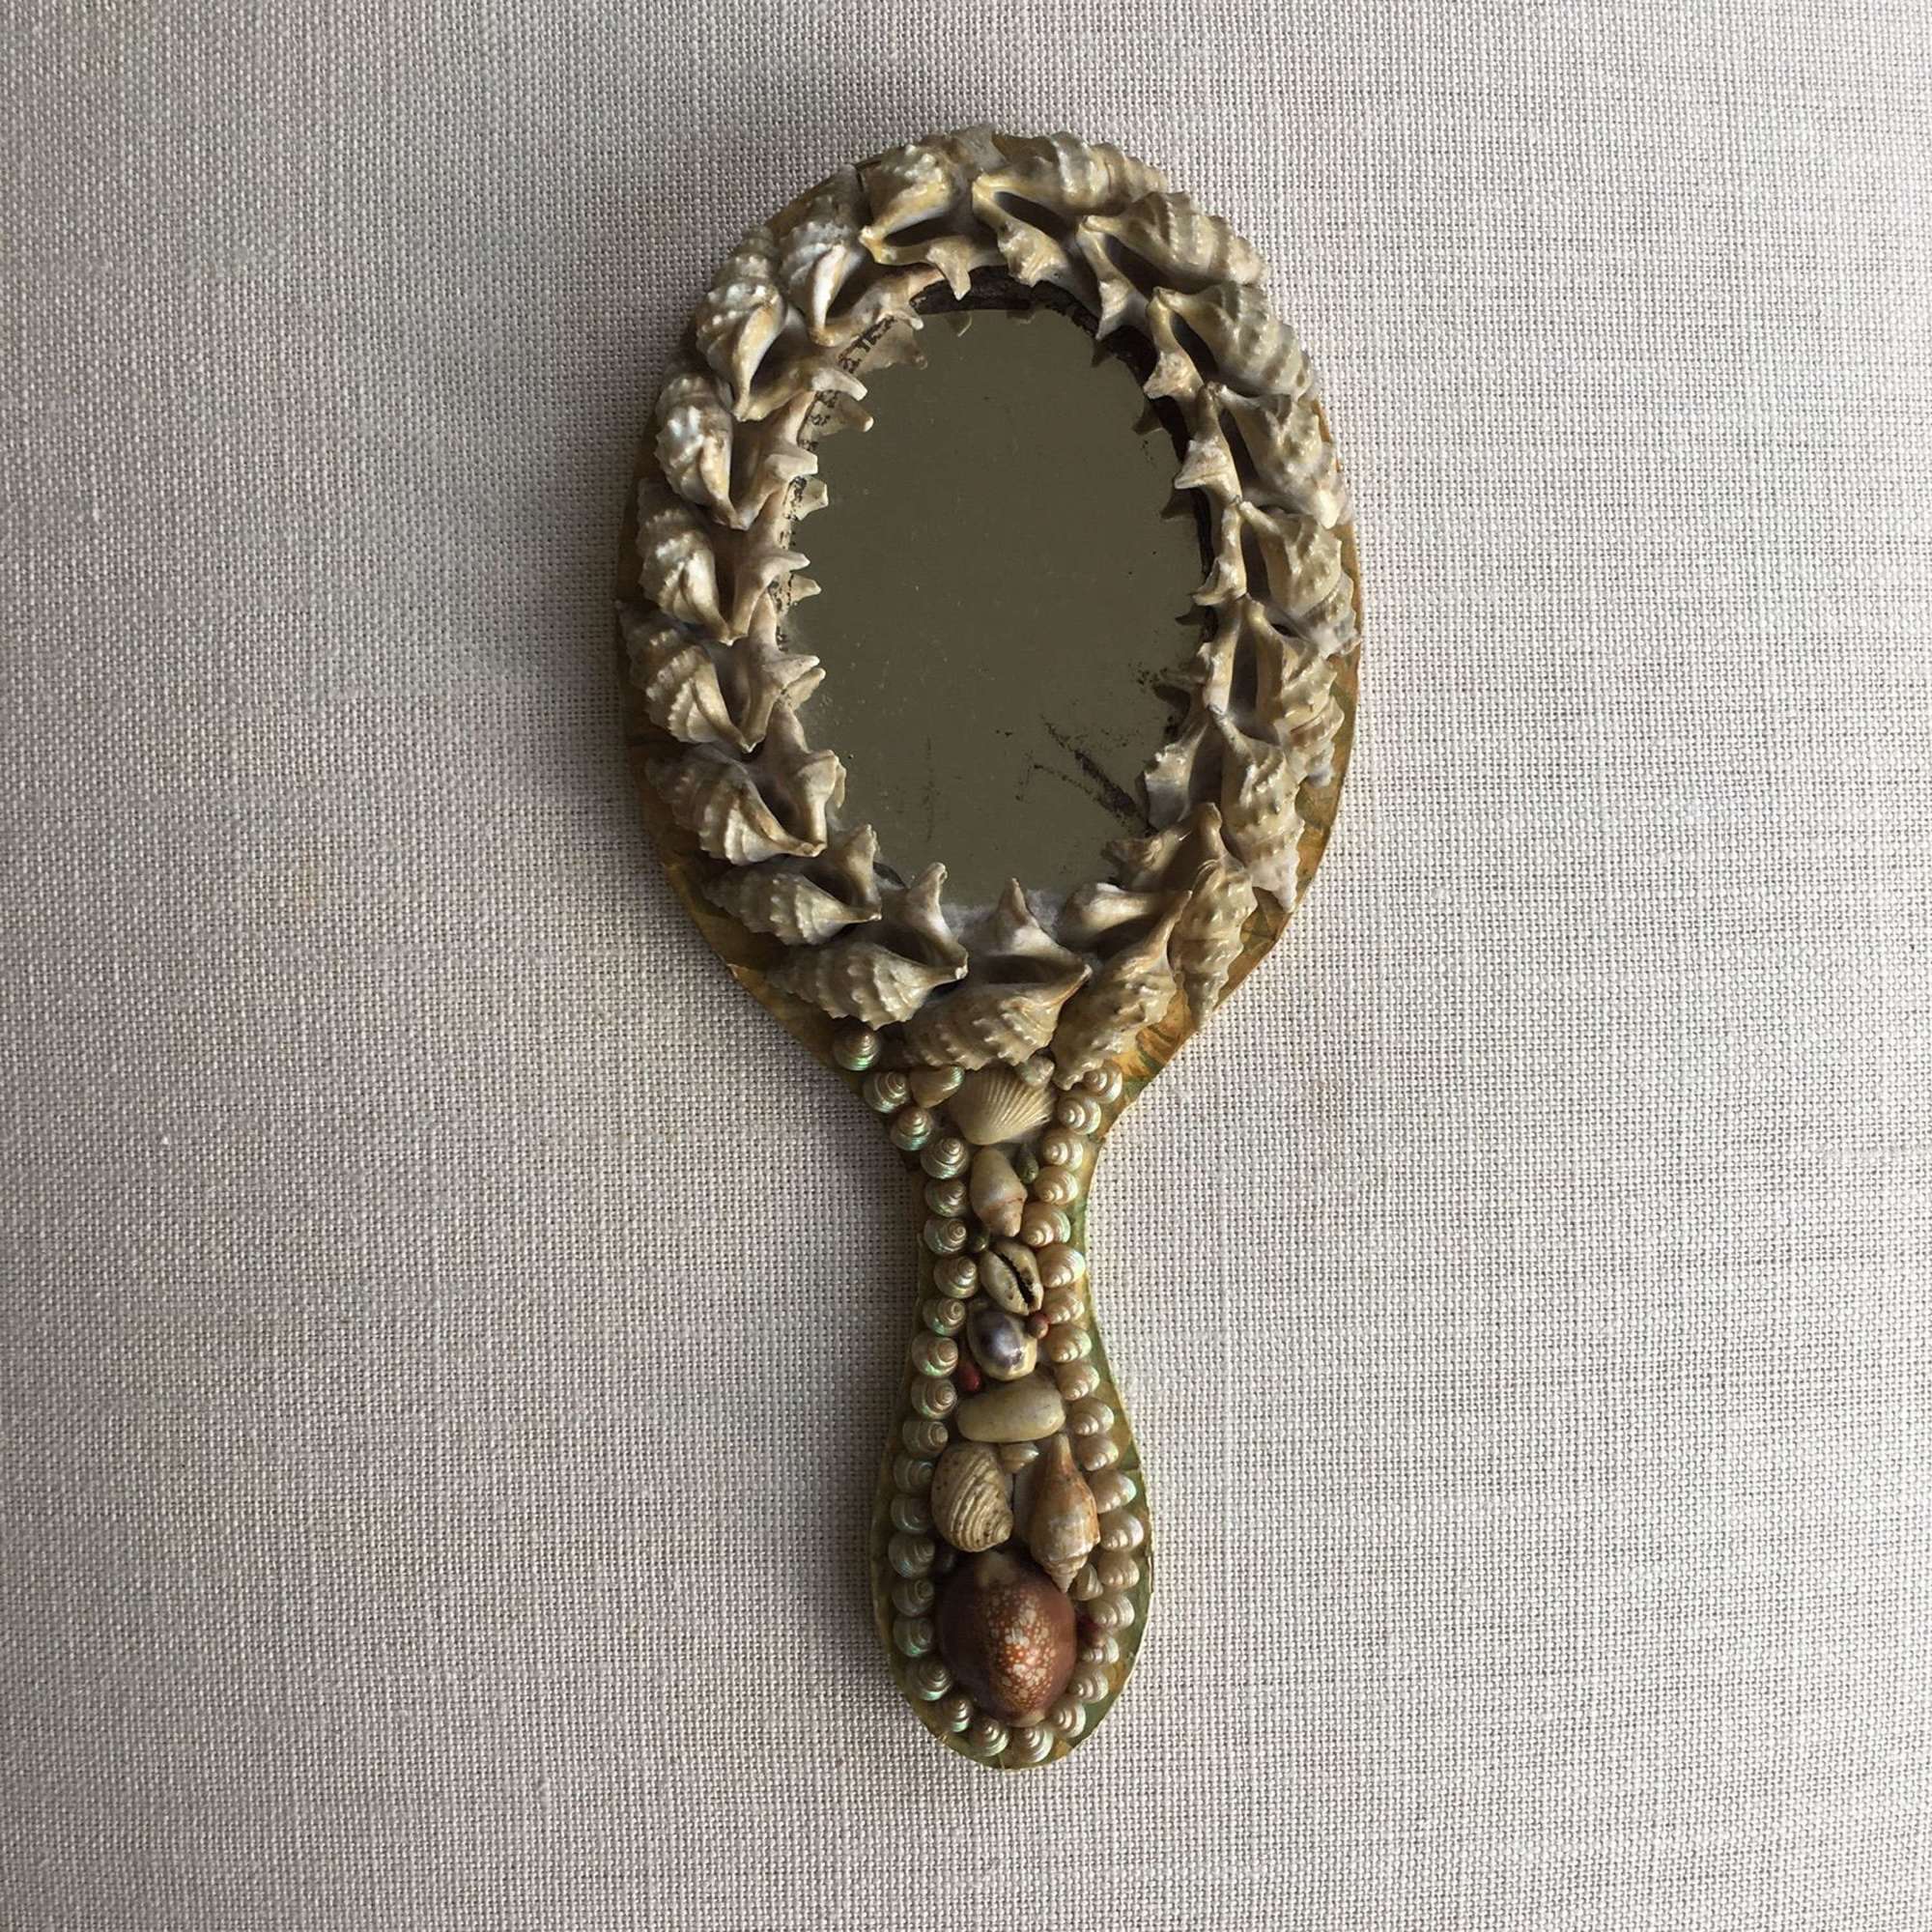 Vintage shell hanging or hand mirror